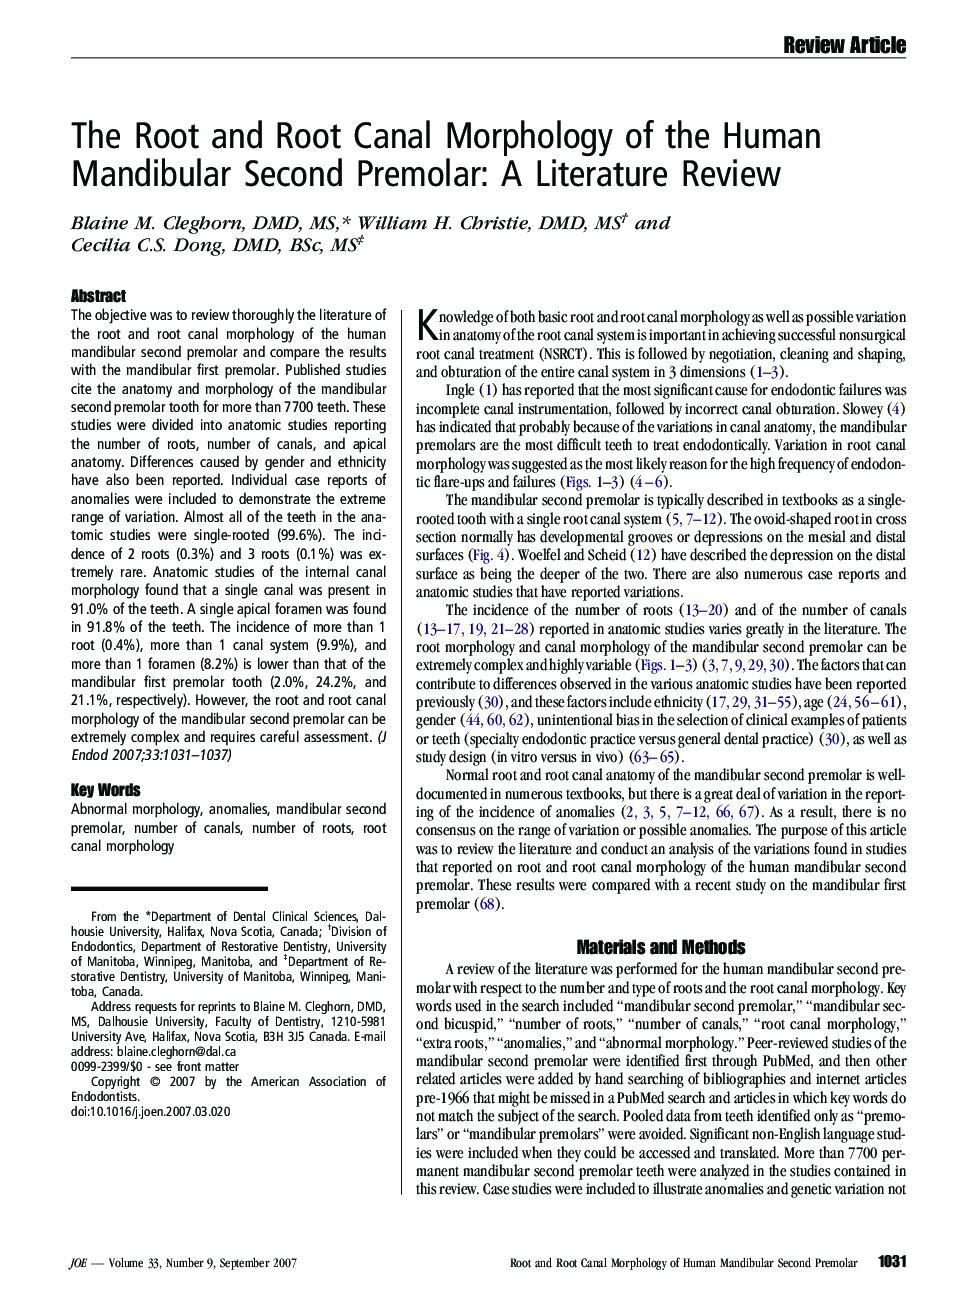 The Root and Root Canal Morphology of the Human Mandibular Second Premolar: A Literature Review